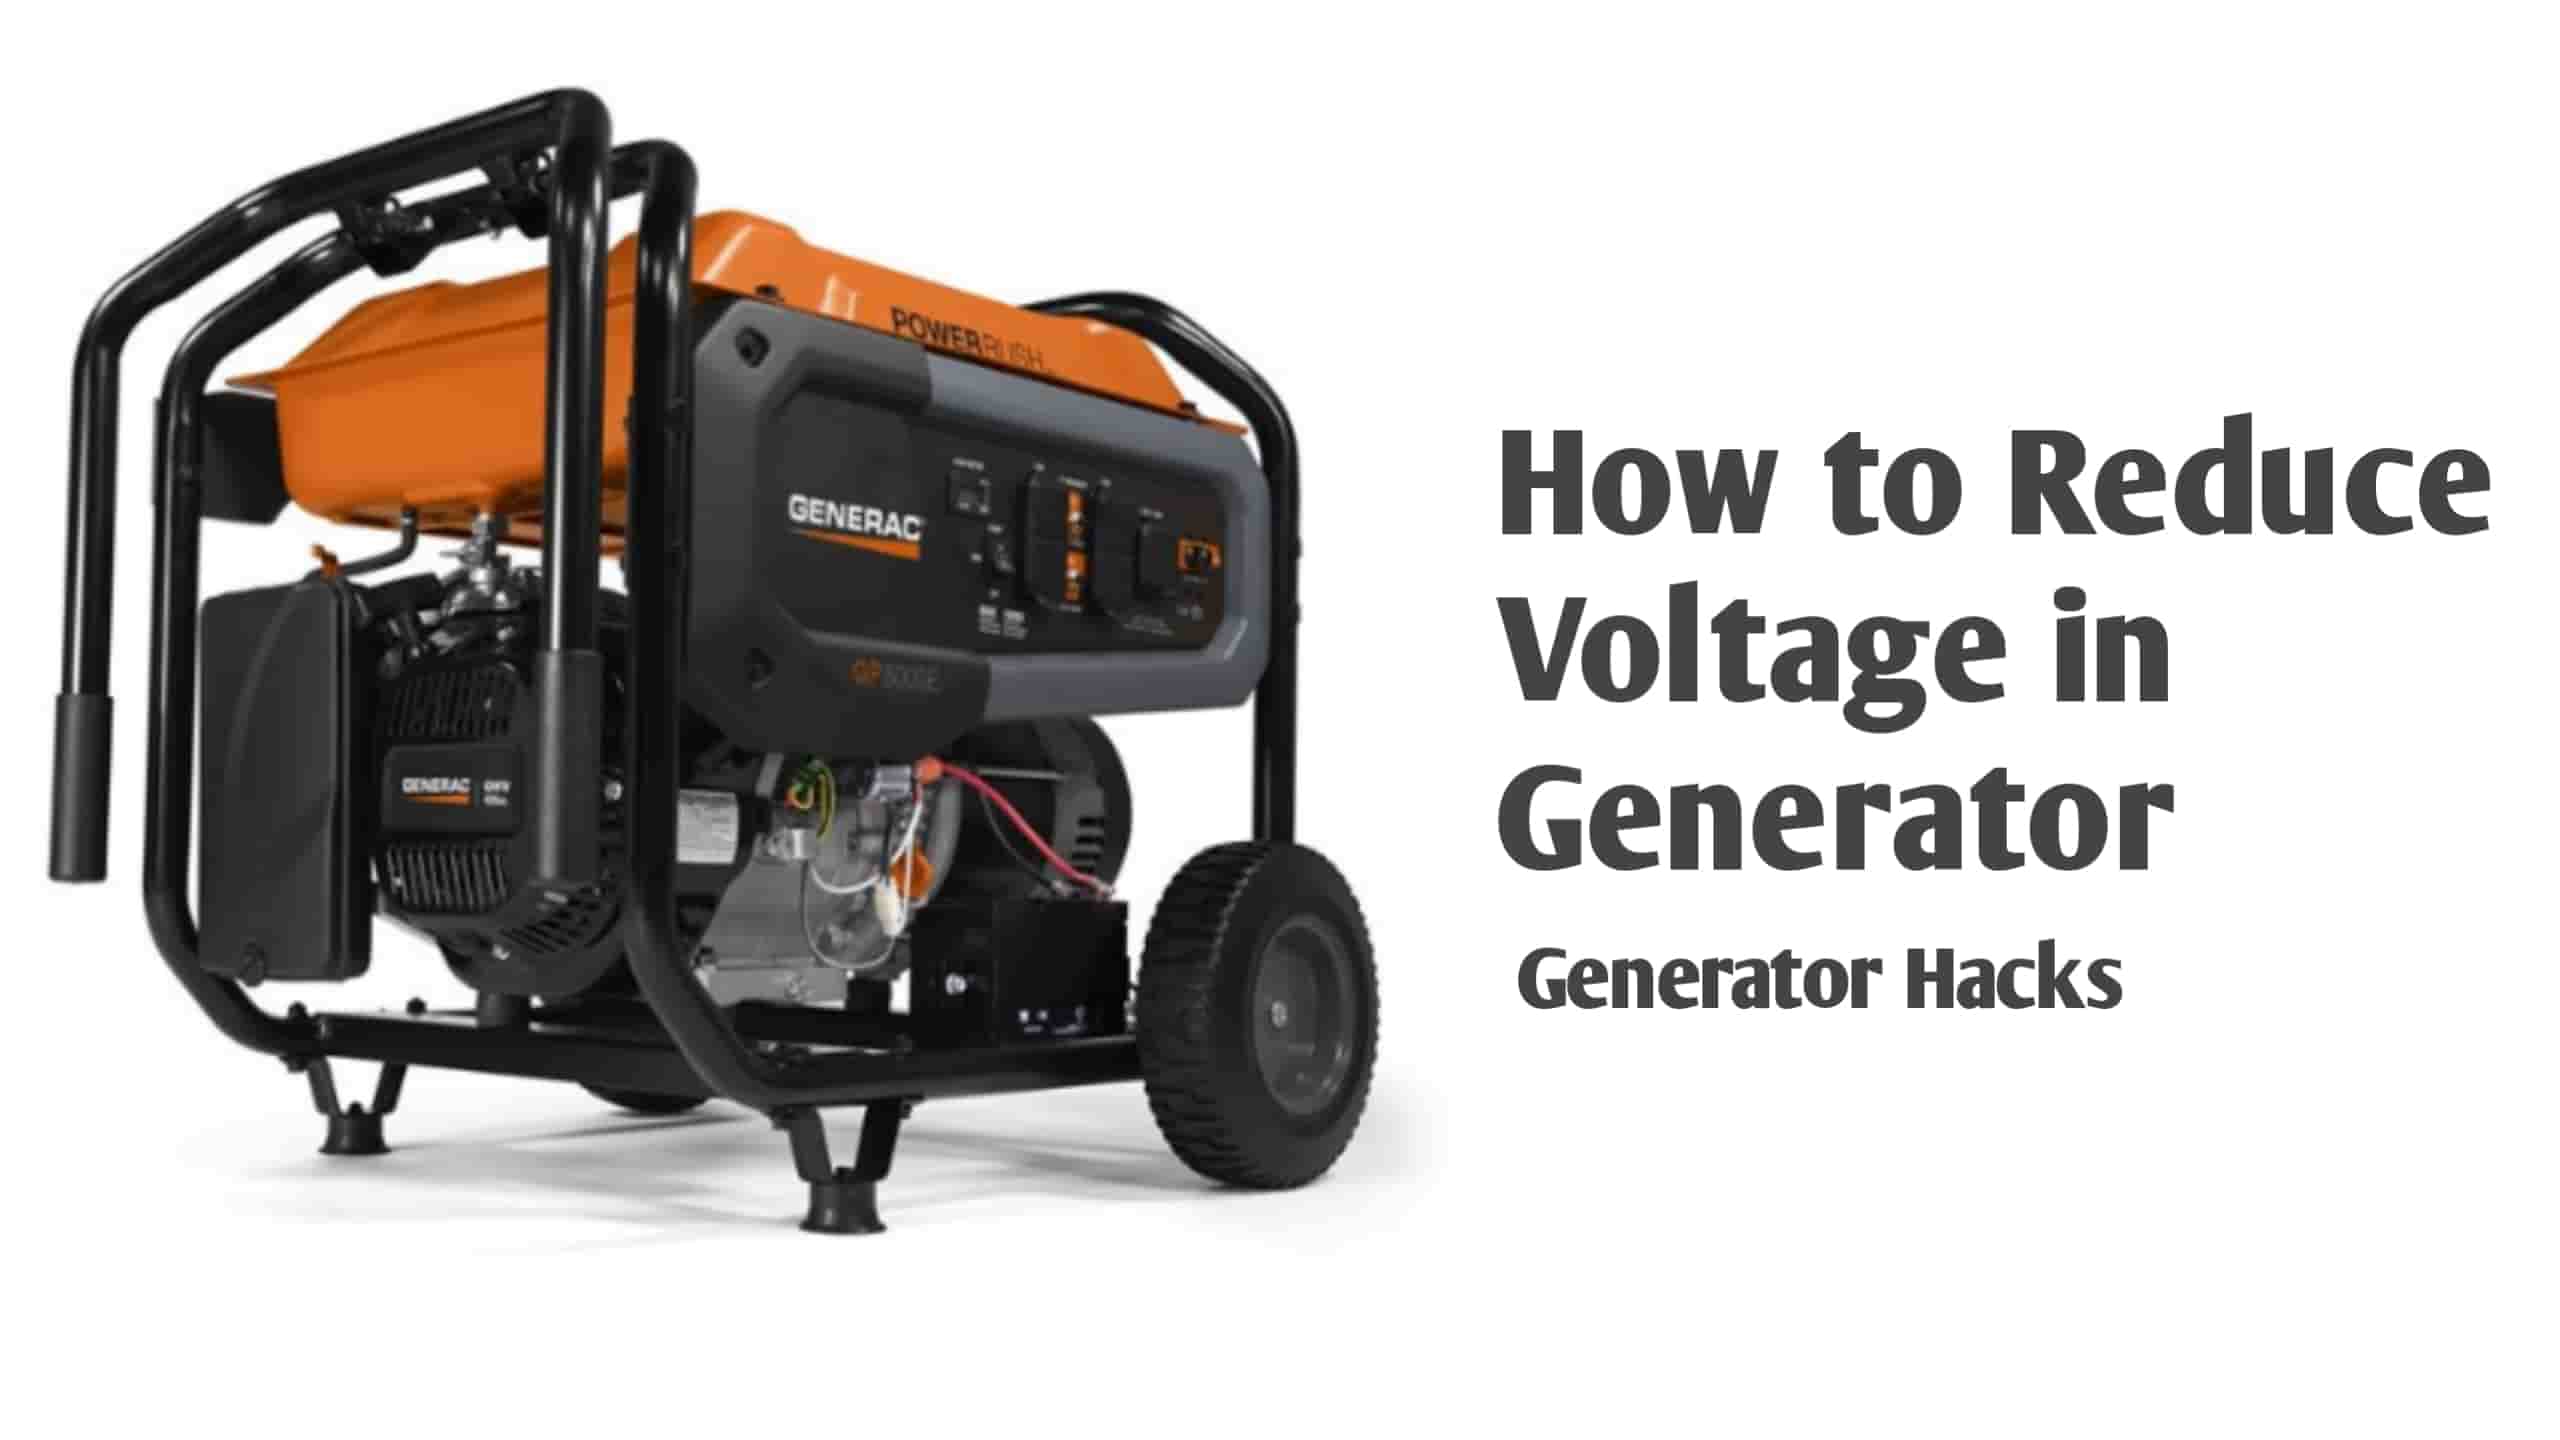 How to Reduce Voltage in Generator,